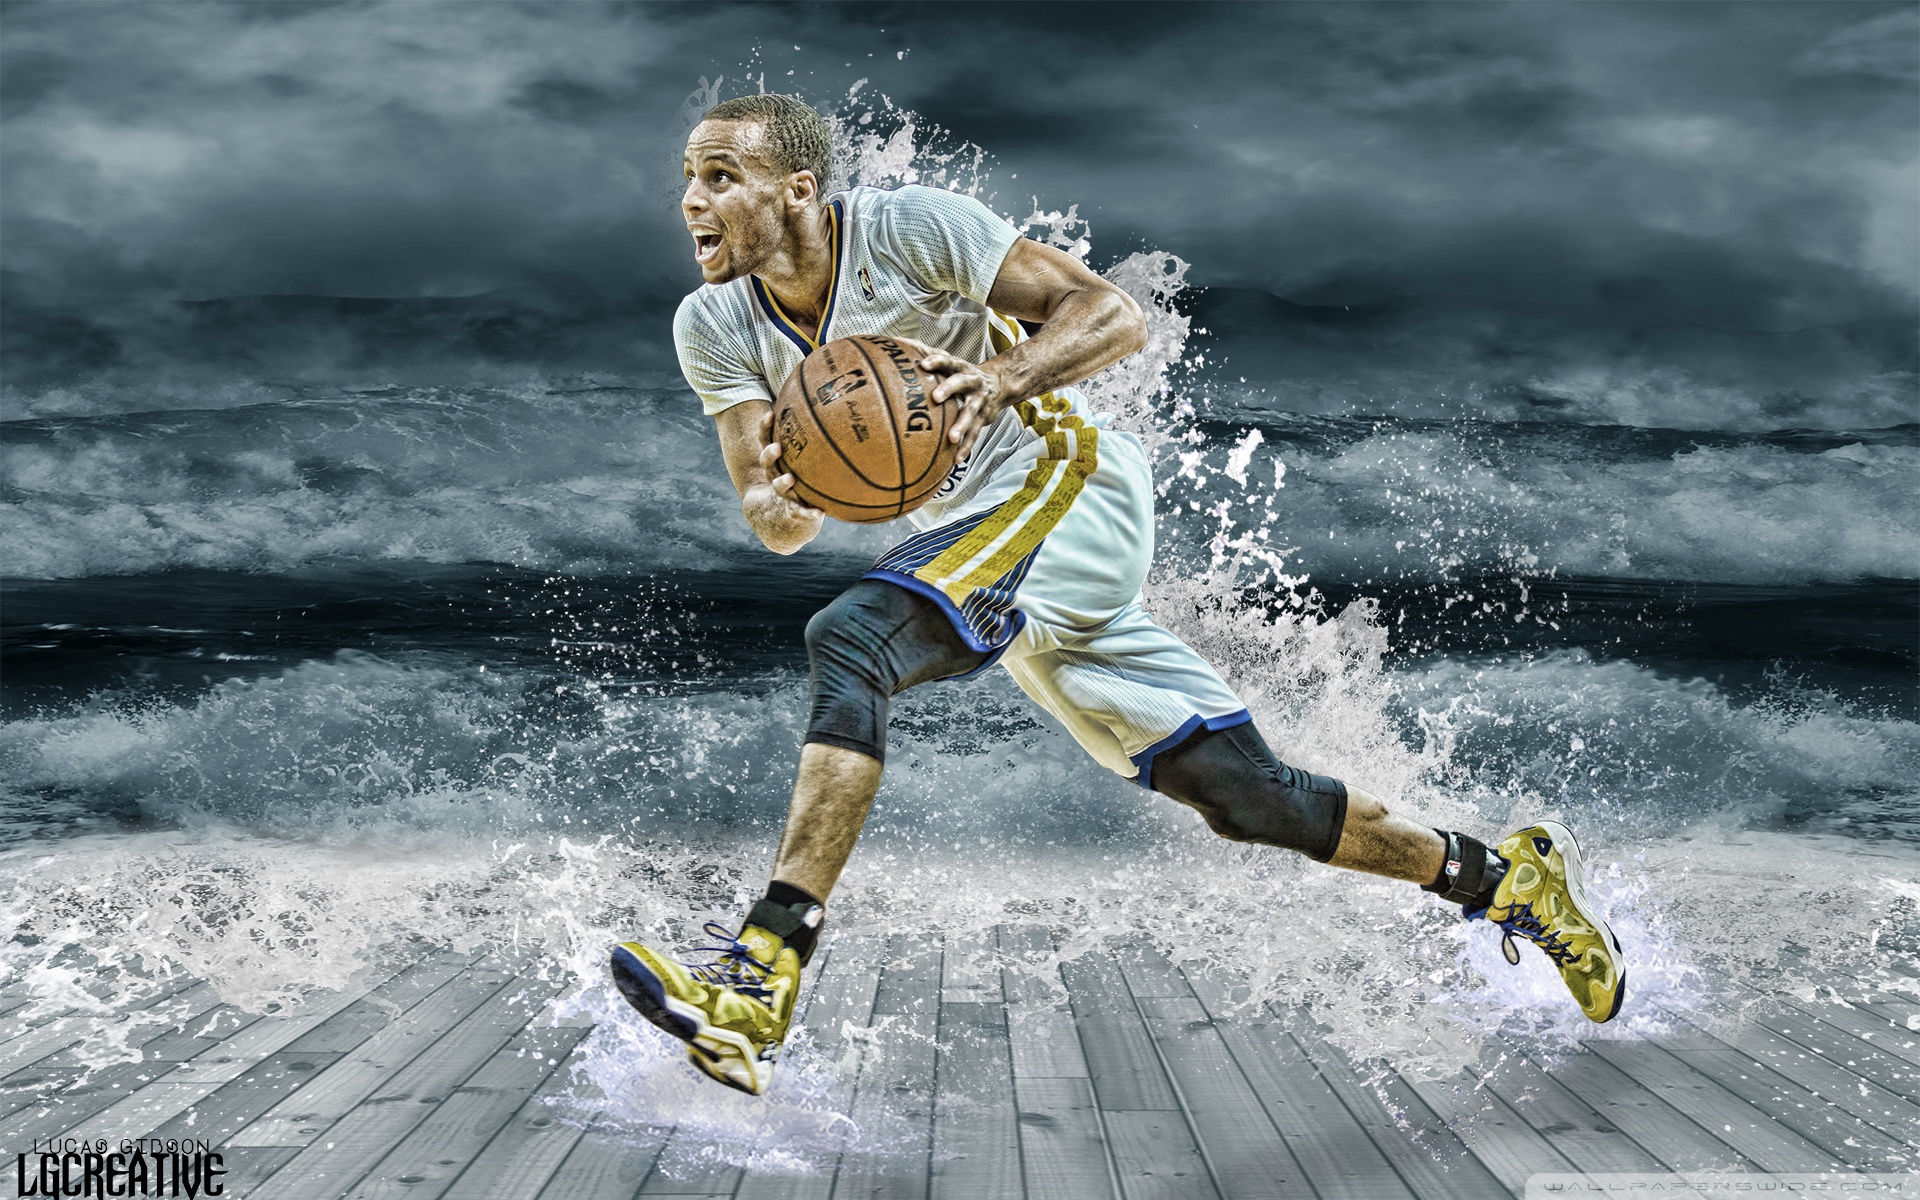 Nba Wallpapers Stephen Curry Stephen Curry Wallpapers - Stephen Curry Splash - HD Wallpaper 